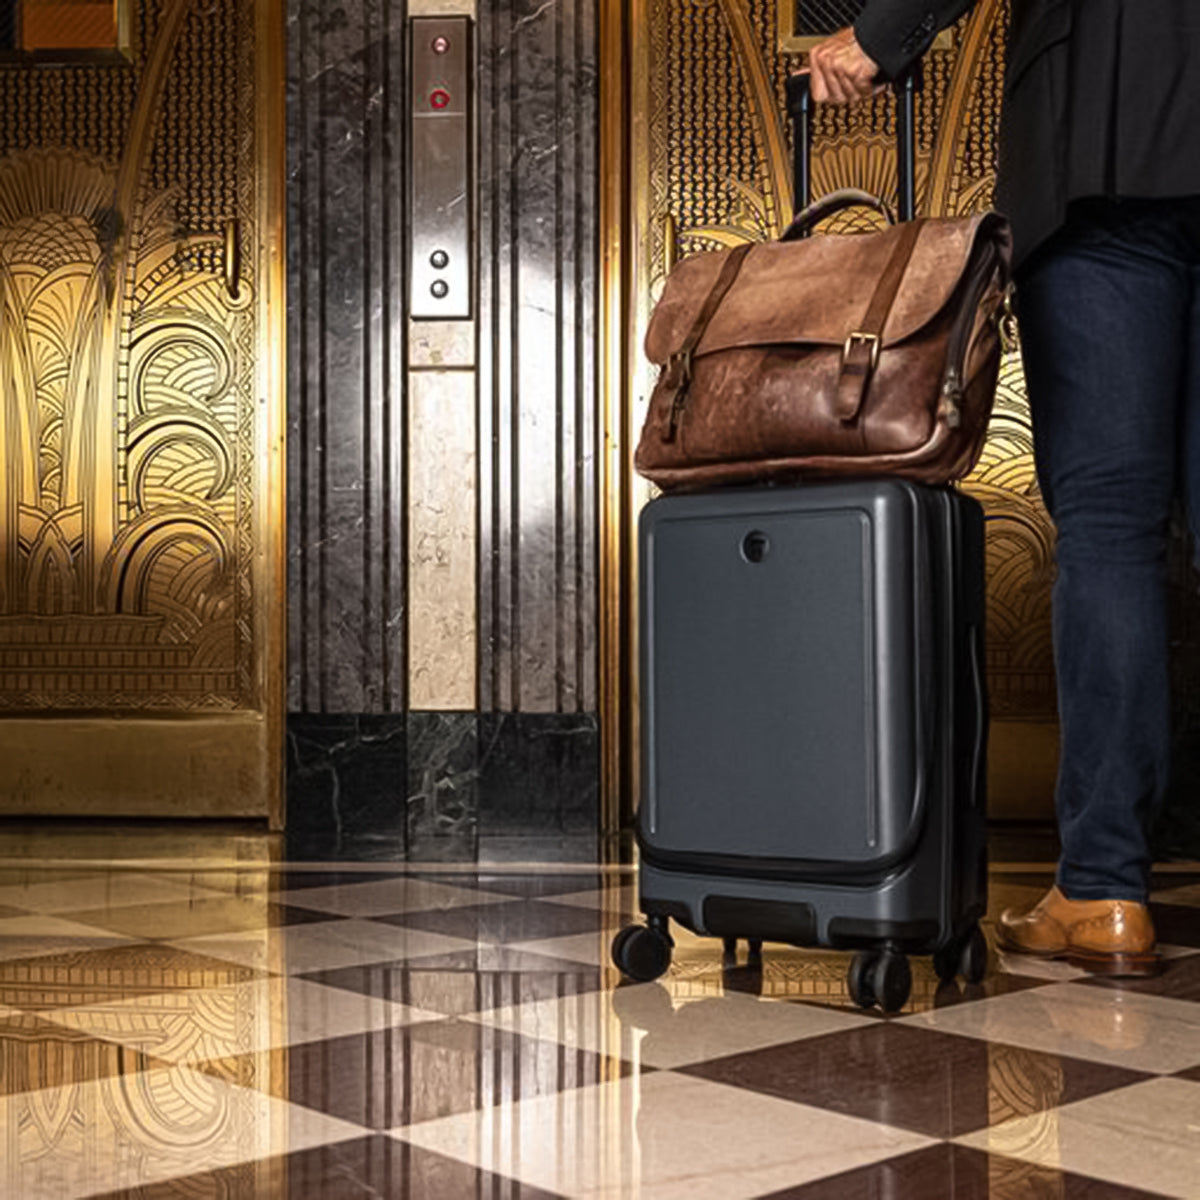 Props 22" Carry-On Spinner Luggage